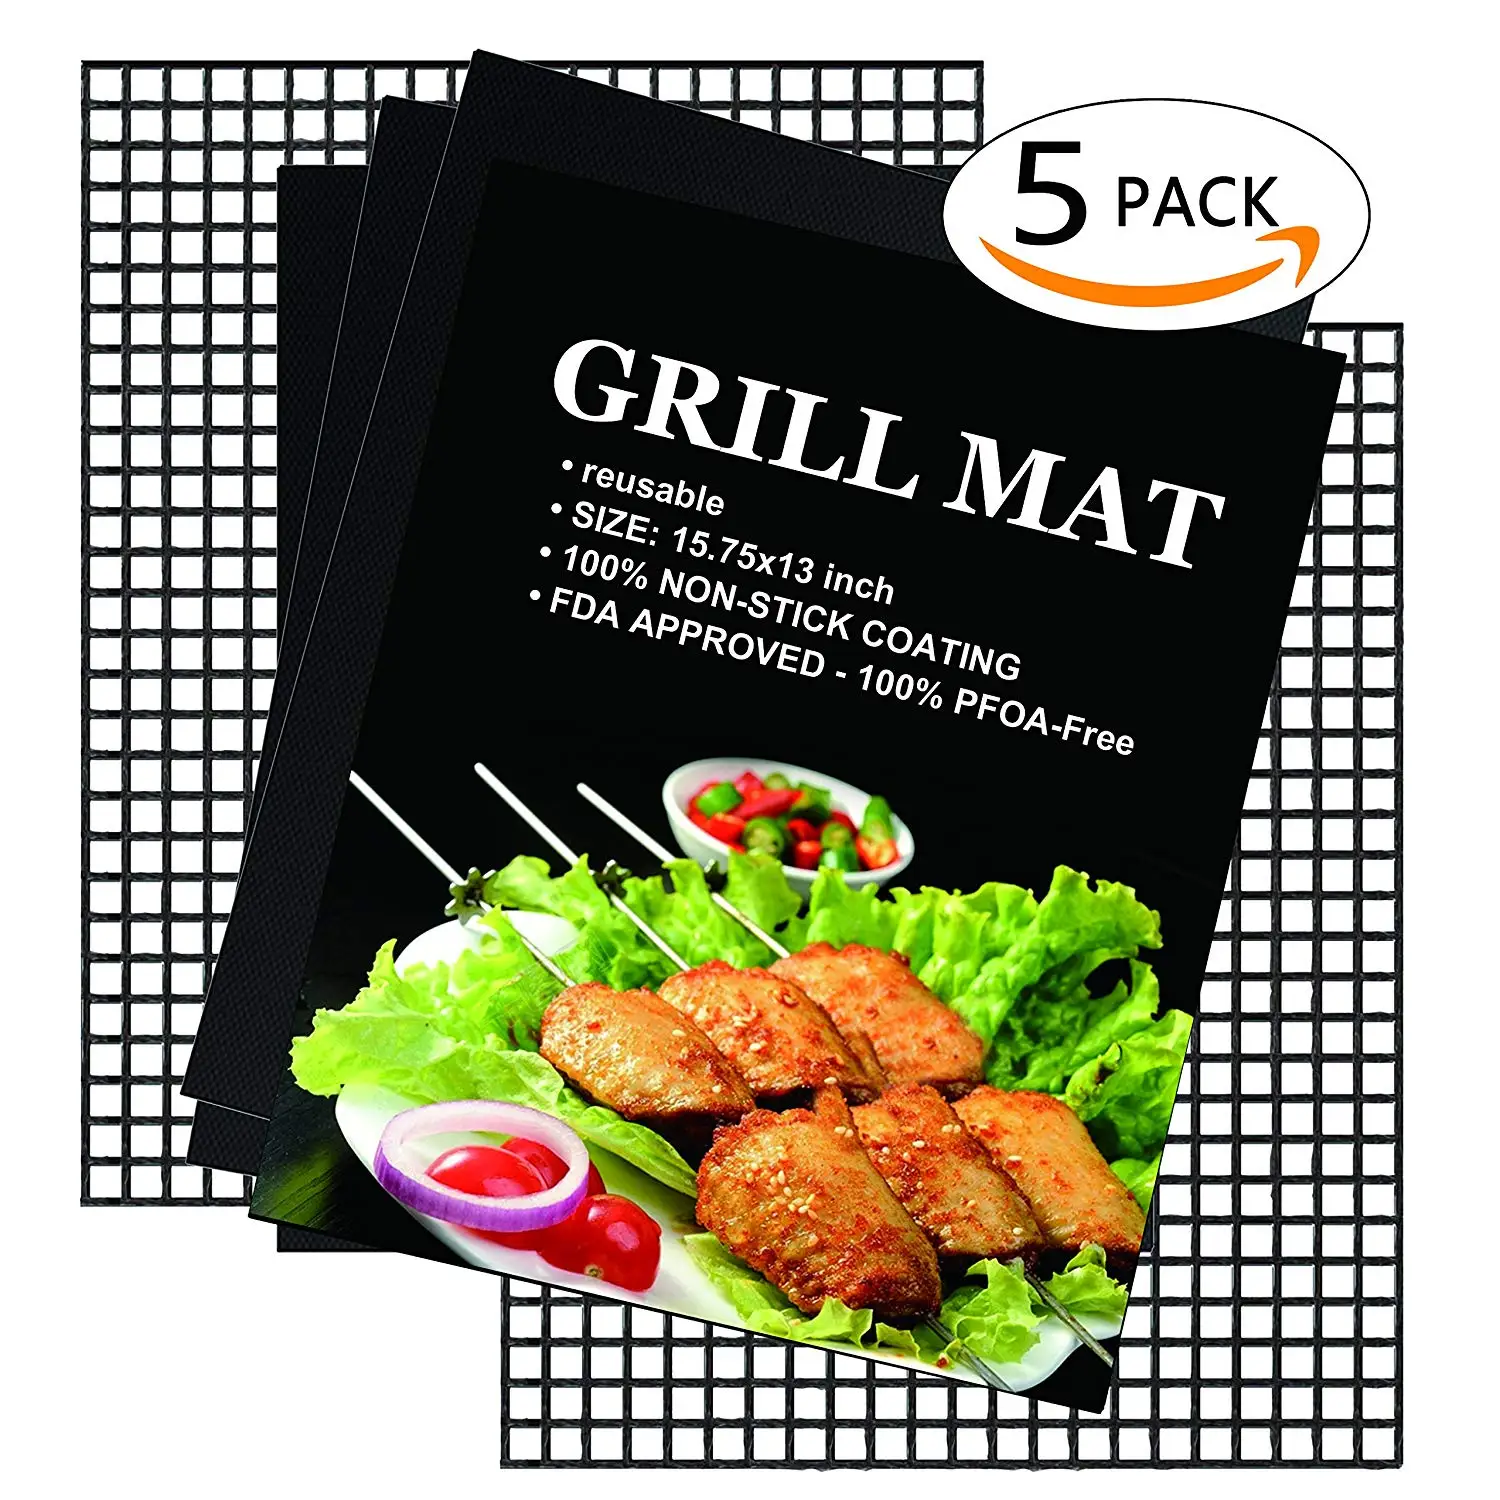 Barbecue Sheets For Grilling Meat BBQ Grill Mat,Non Stick Oven Liner Teflon Cooking Mats,Reusable Eggs,Ideal for Charcoal Grill Durable 1Pcs Easy to Clean Veggies Seafood 